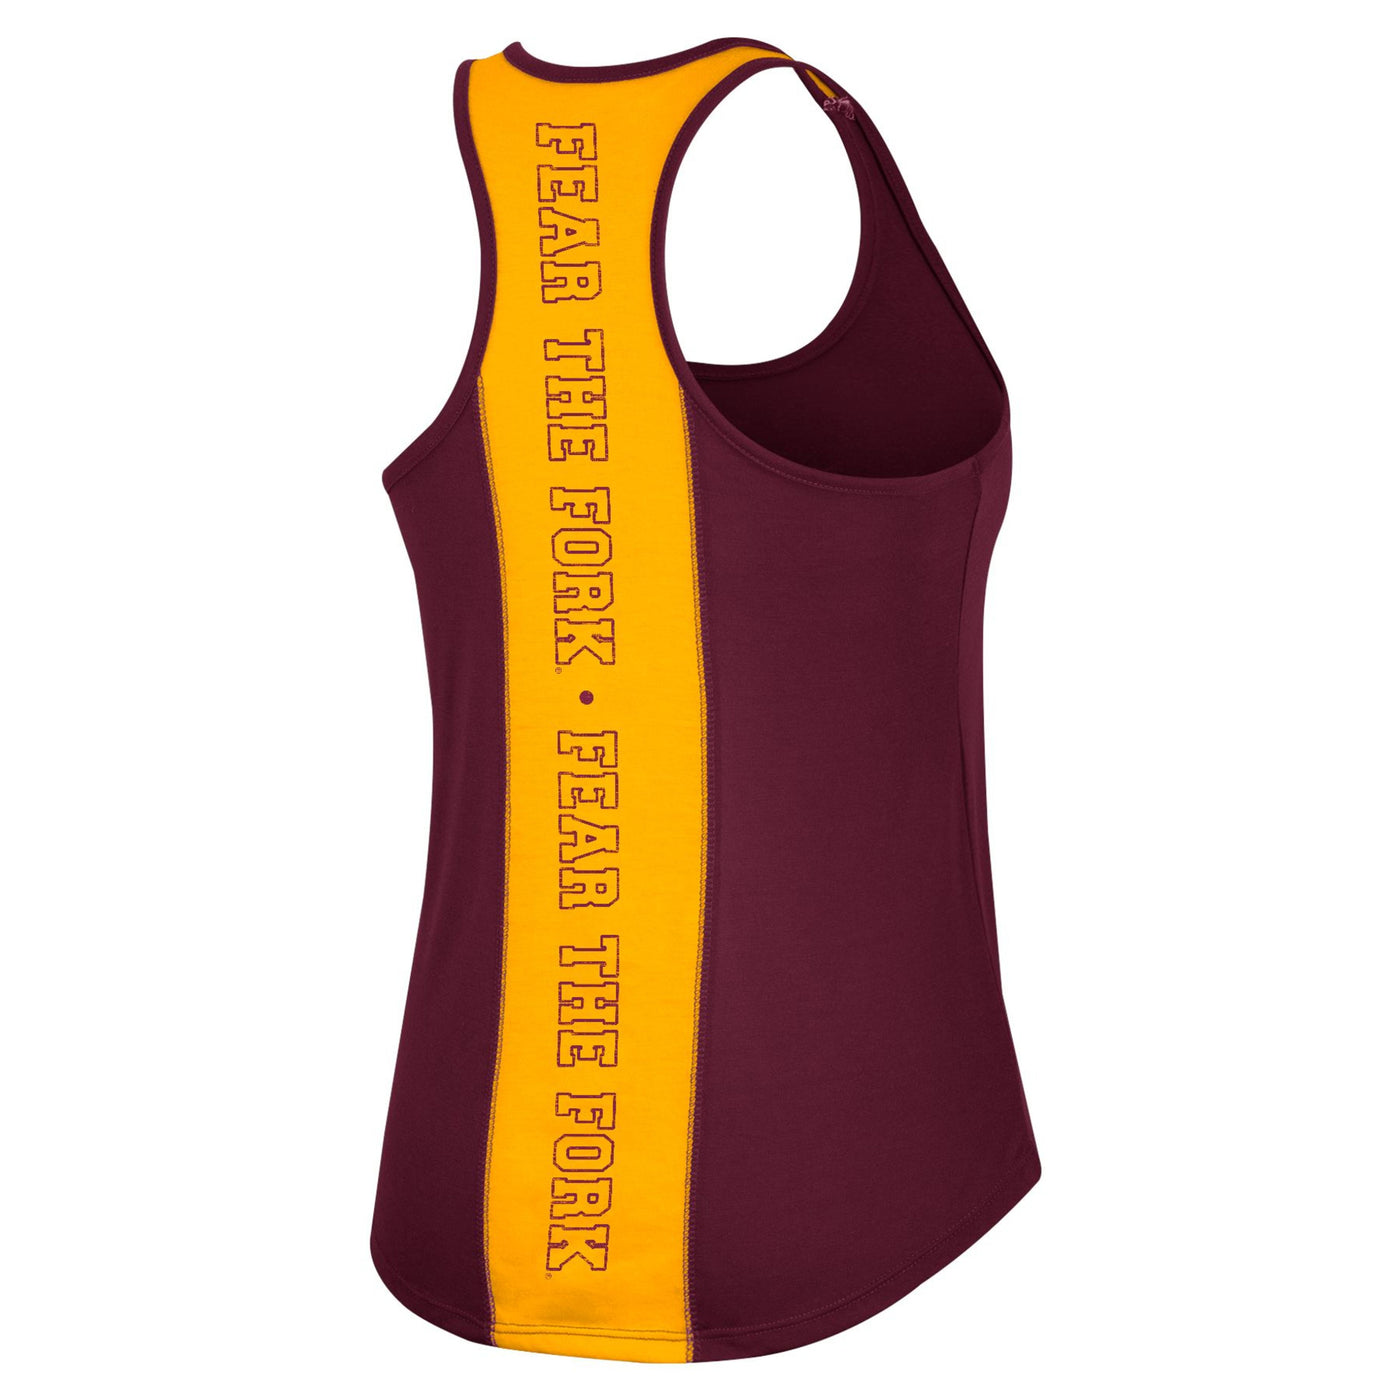 Back side of ASU womens tank with a large gold stripe own the back. Vertically down the stripe is the text 